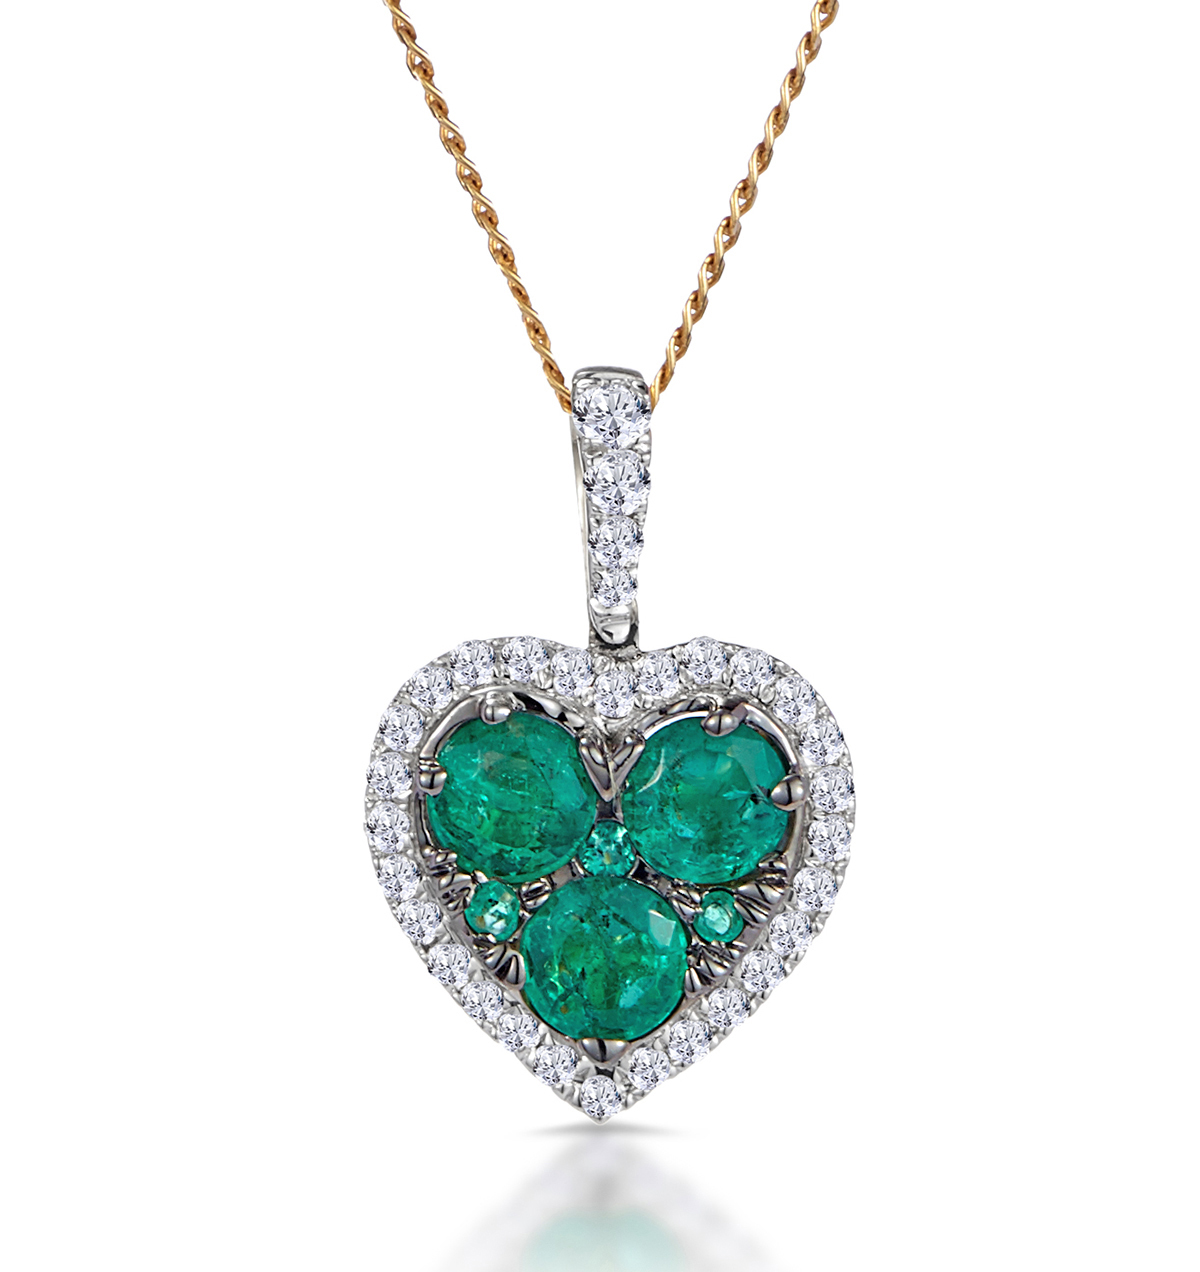 Emerald Heart Pendant Necklace Top Sellers, 50% OFF | www ...